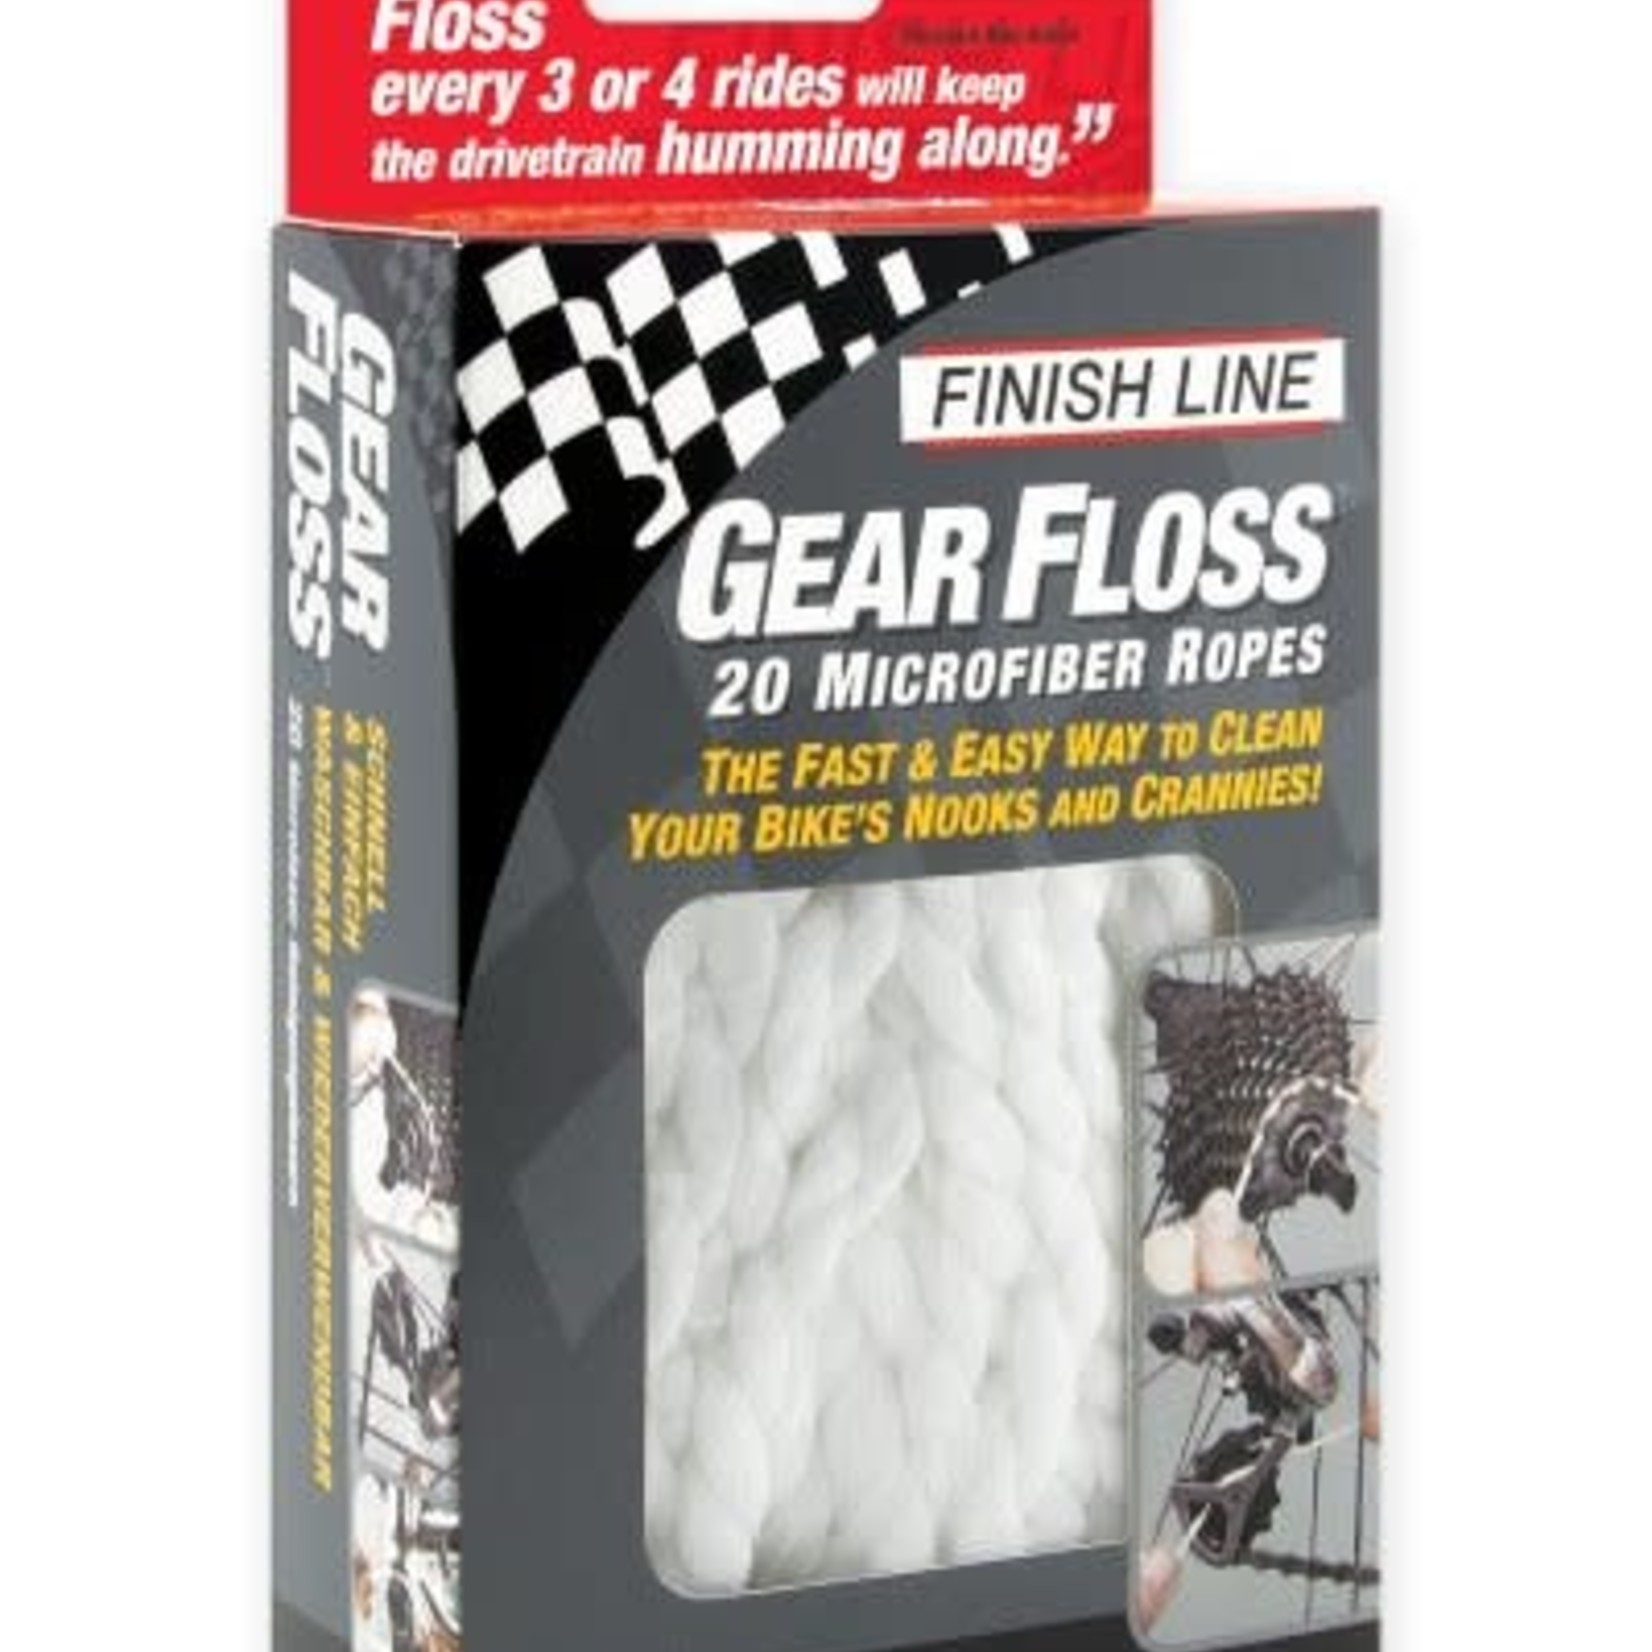 FINISH LINE Finish Line, Gear Floss, pack of 20